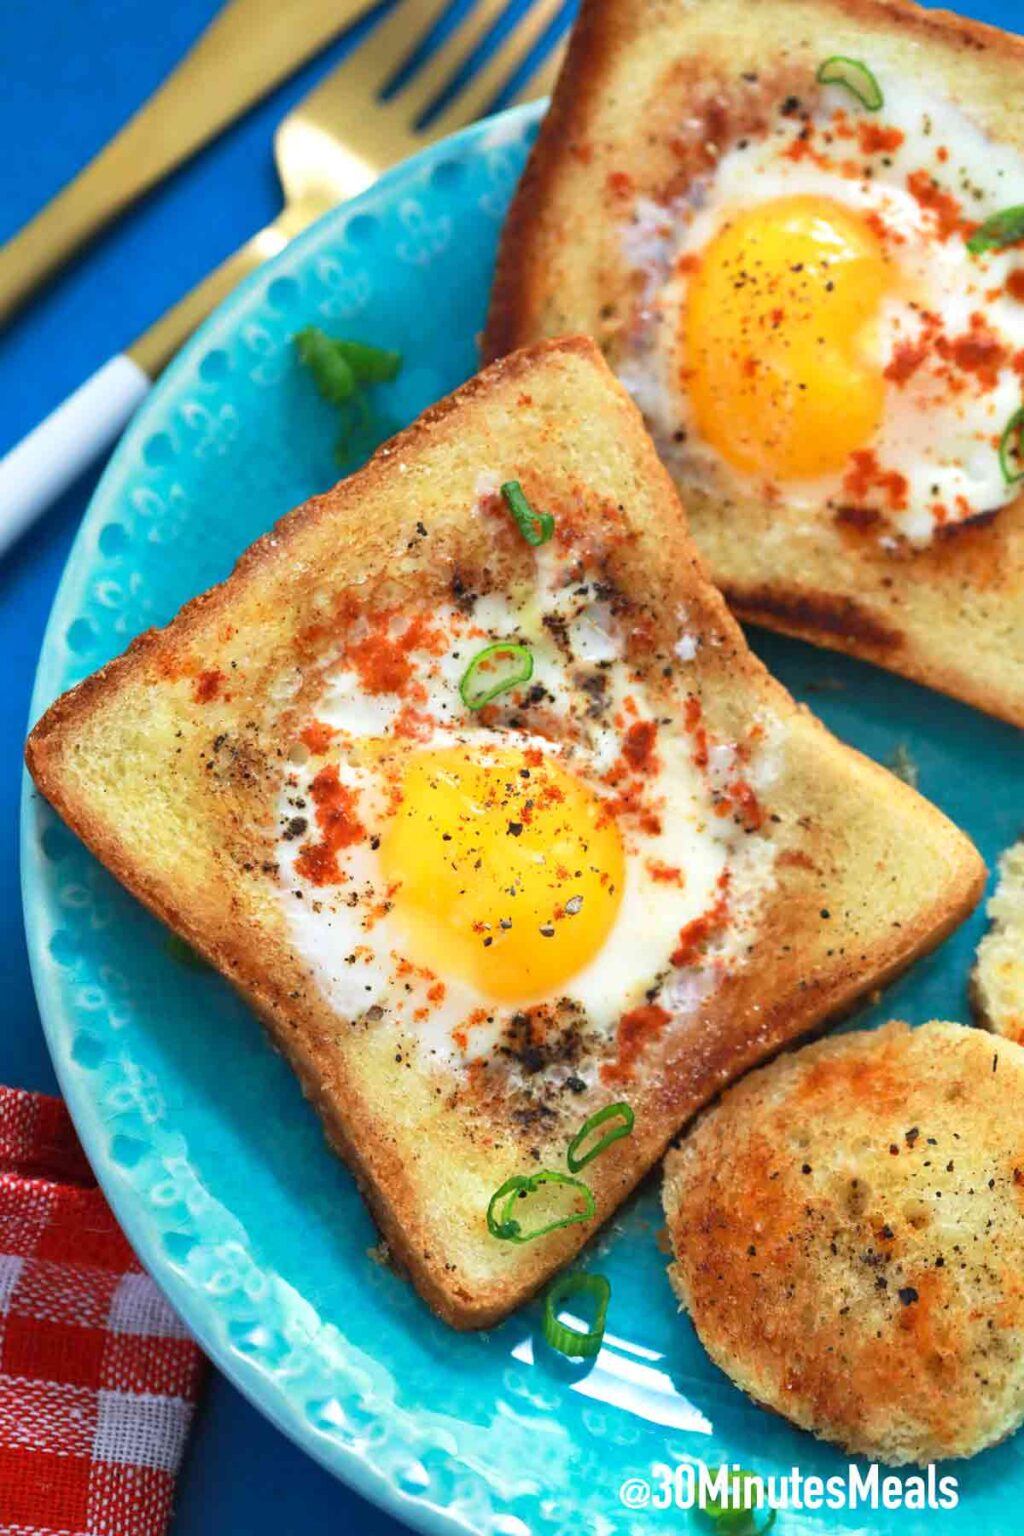 Eggs in a Basket Recipe - 30 minutes meals